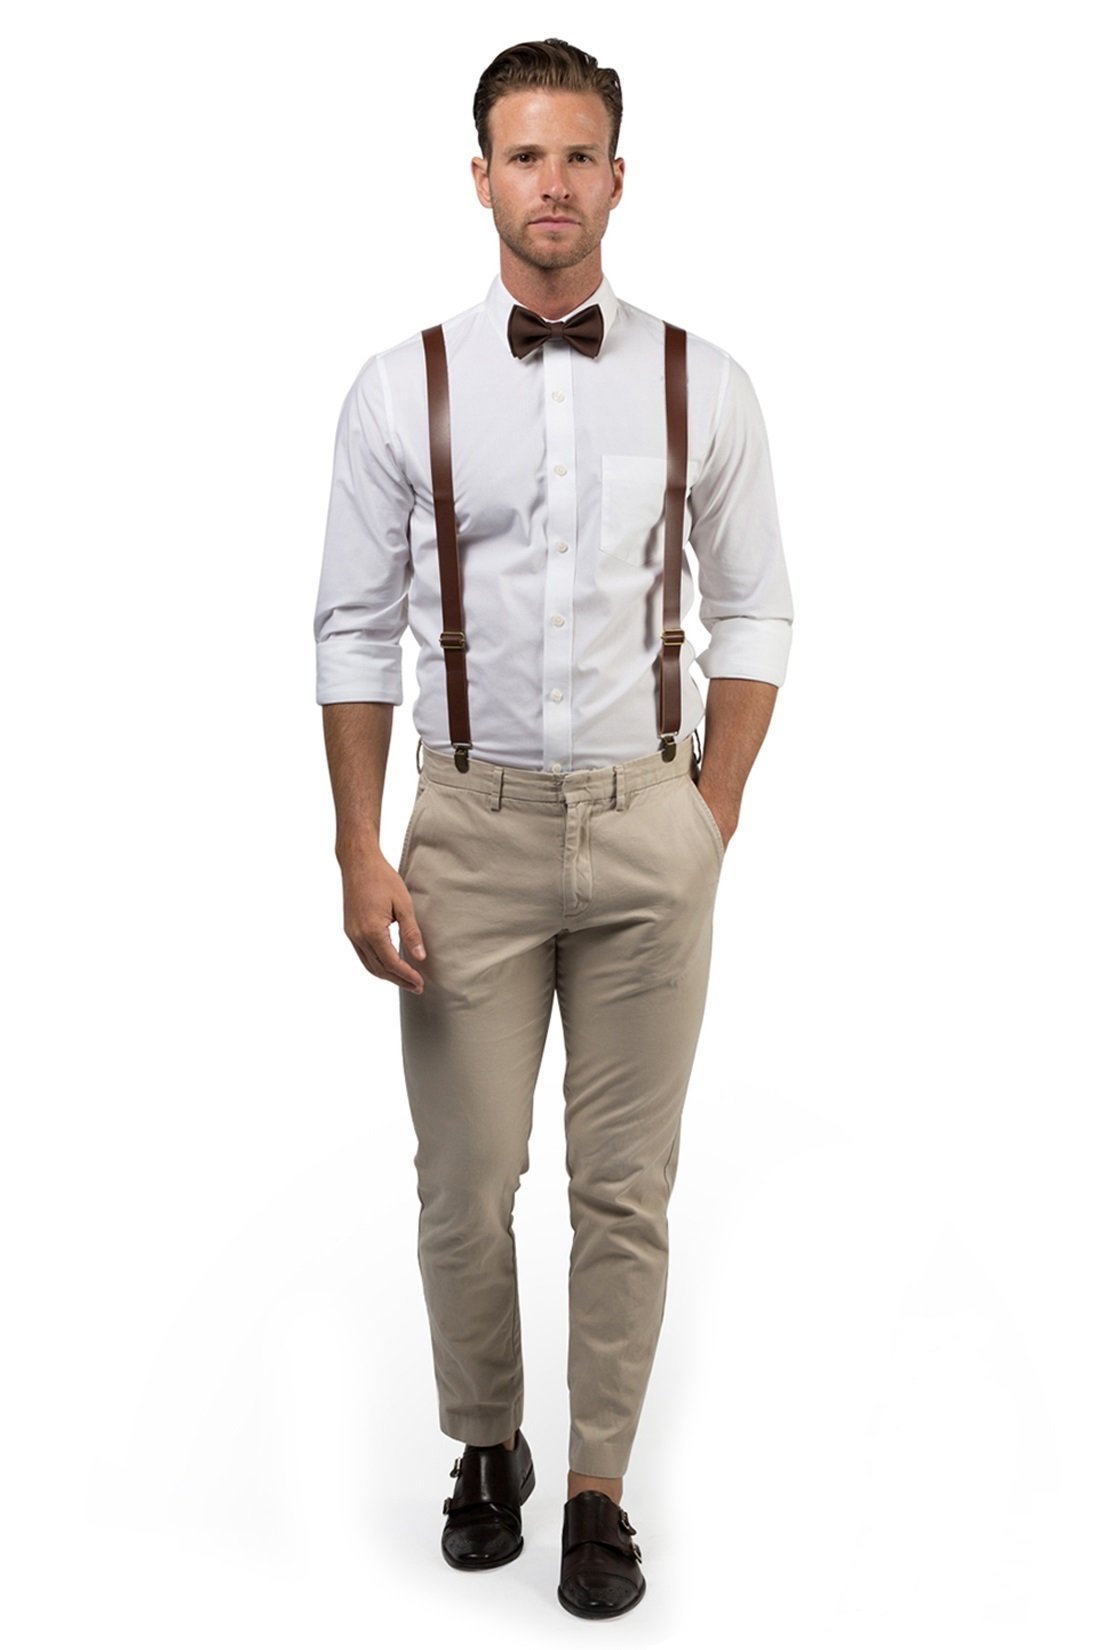 Brown Leather Suspenders & Brown Bow Tie - Baby to Adult Sizes– Armoniia